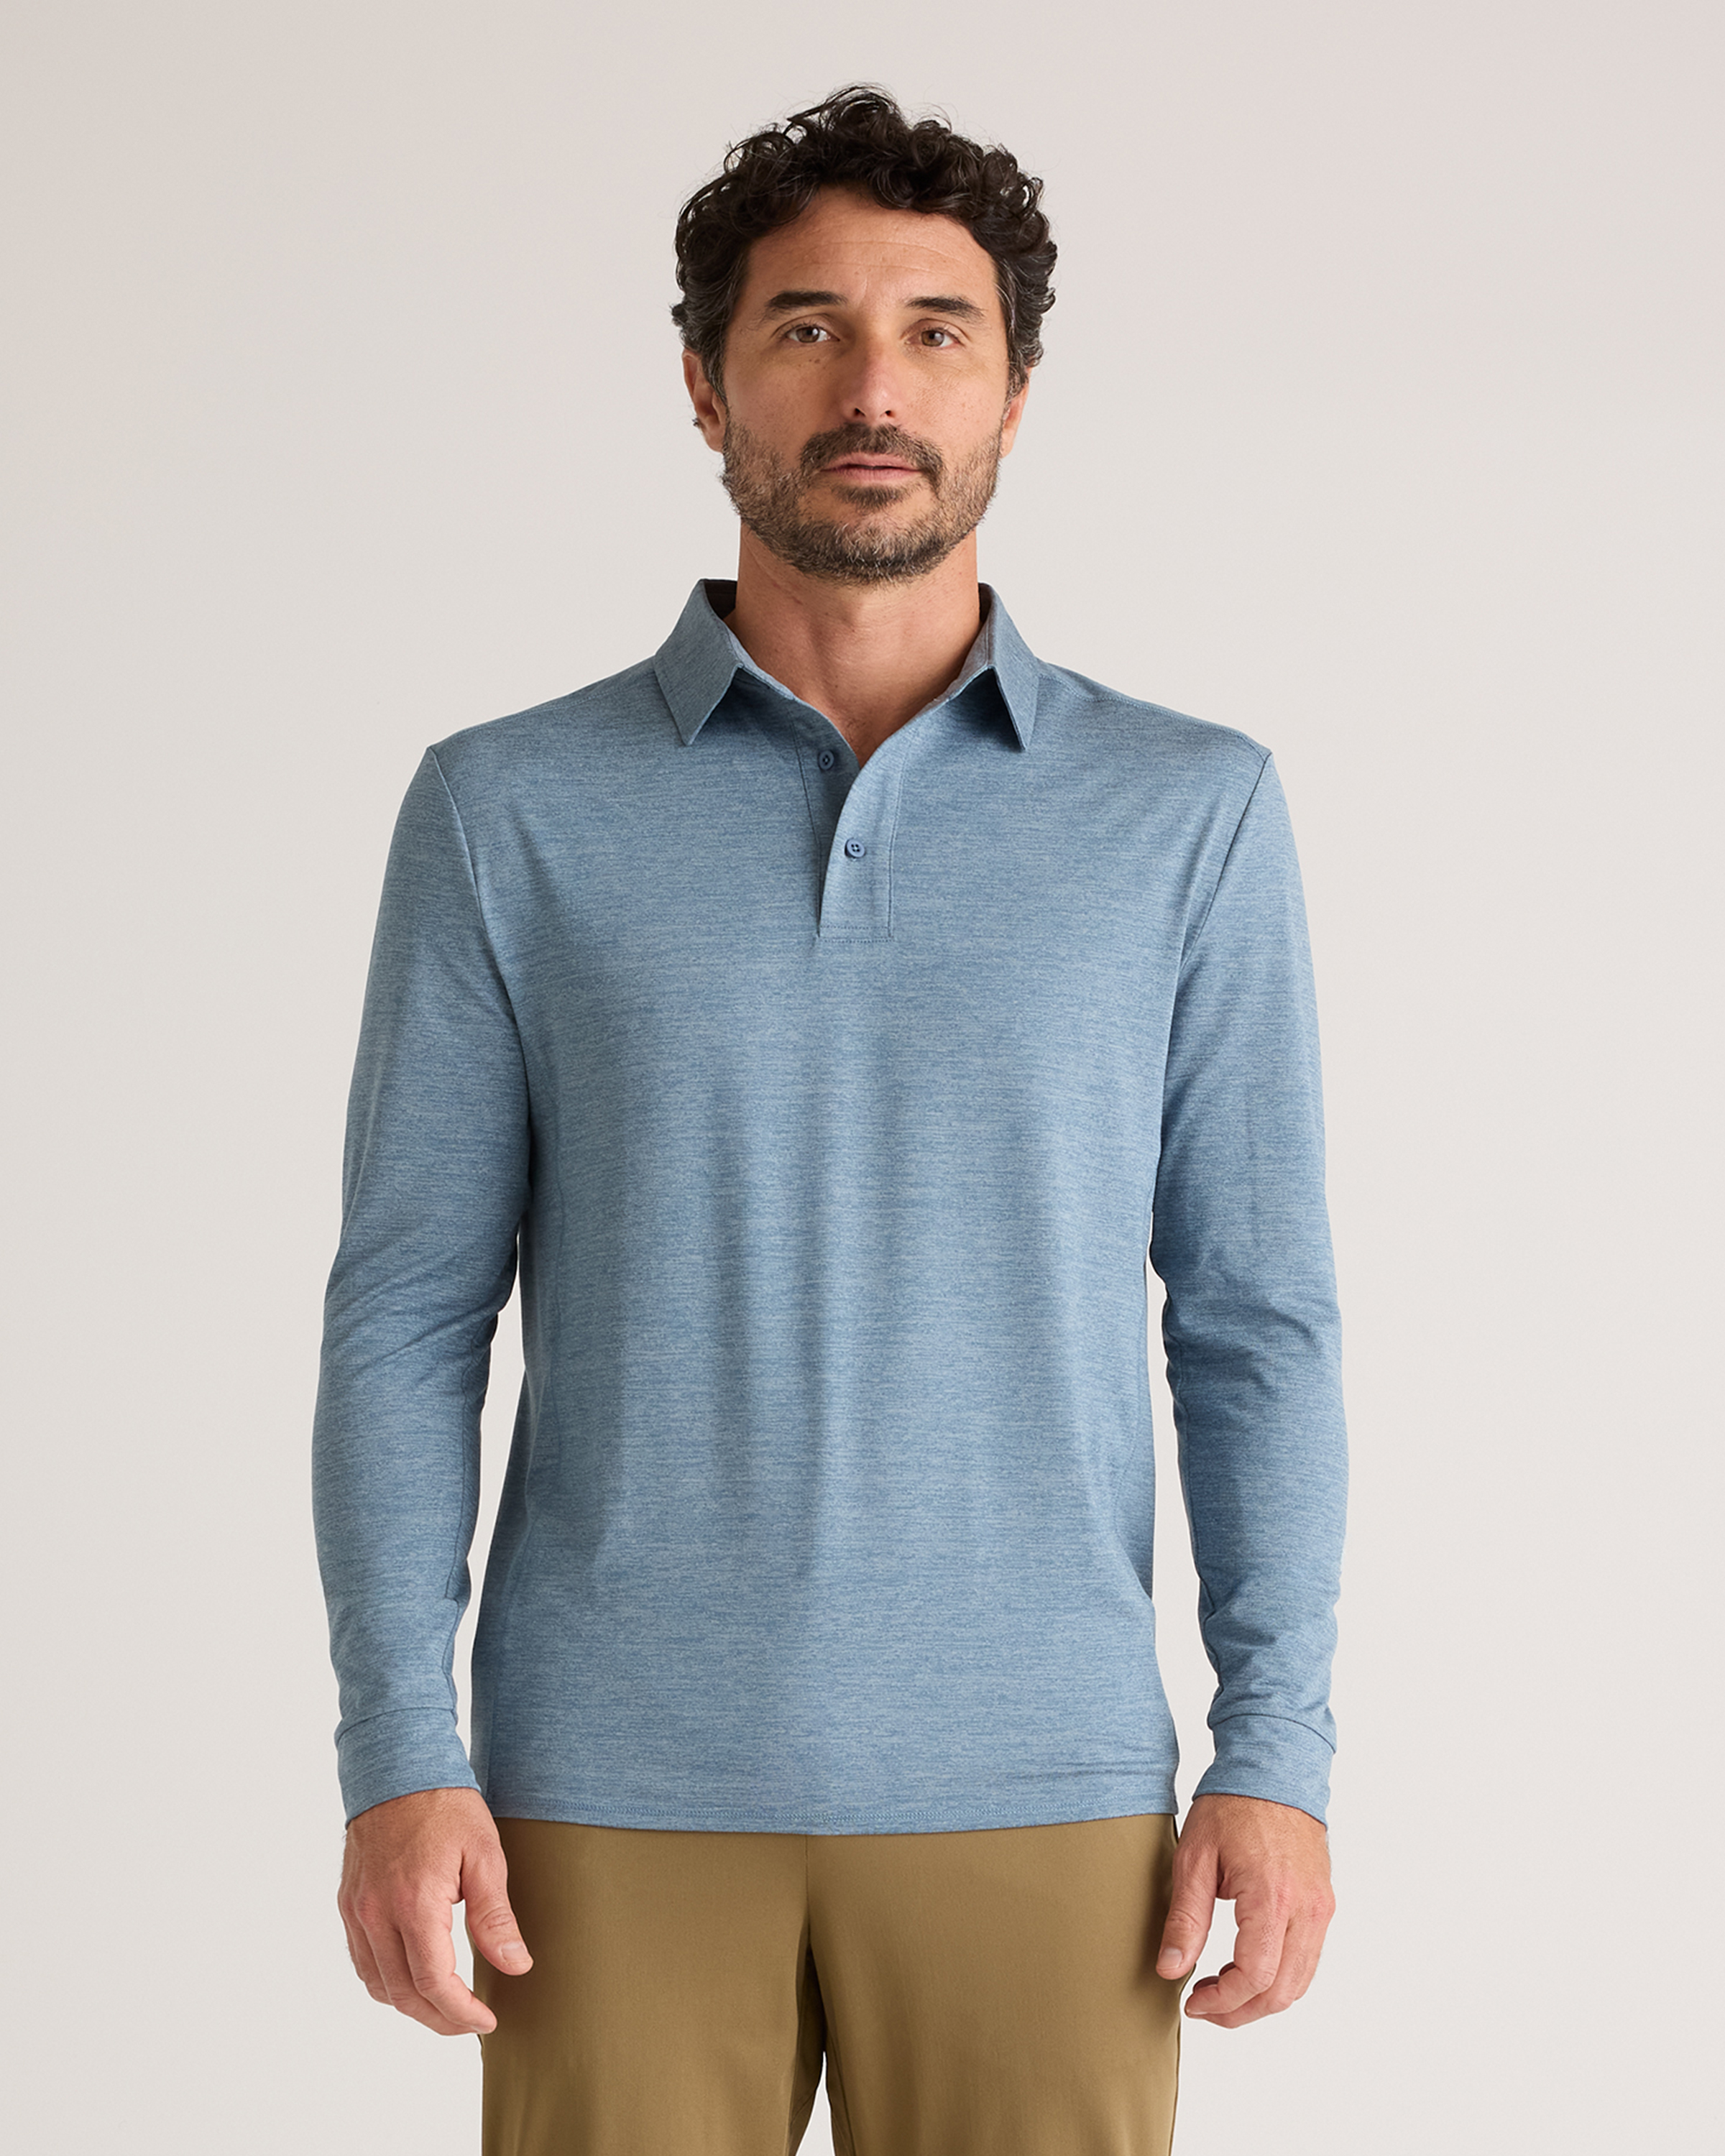 Quince Men's Flowknit Breeze Performance Long Sleeve Polo In Heather Sky Blue